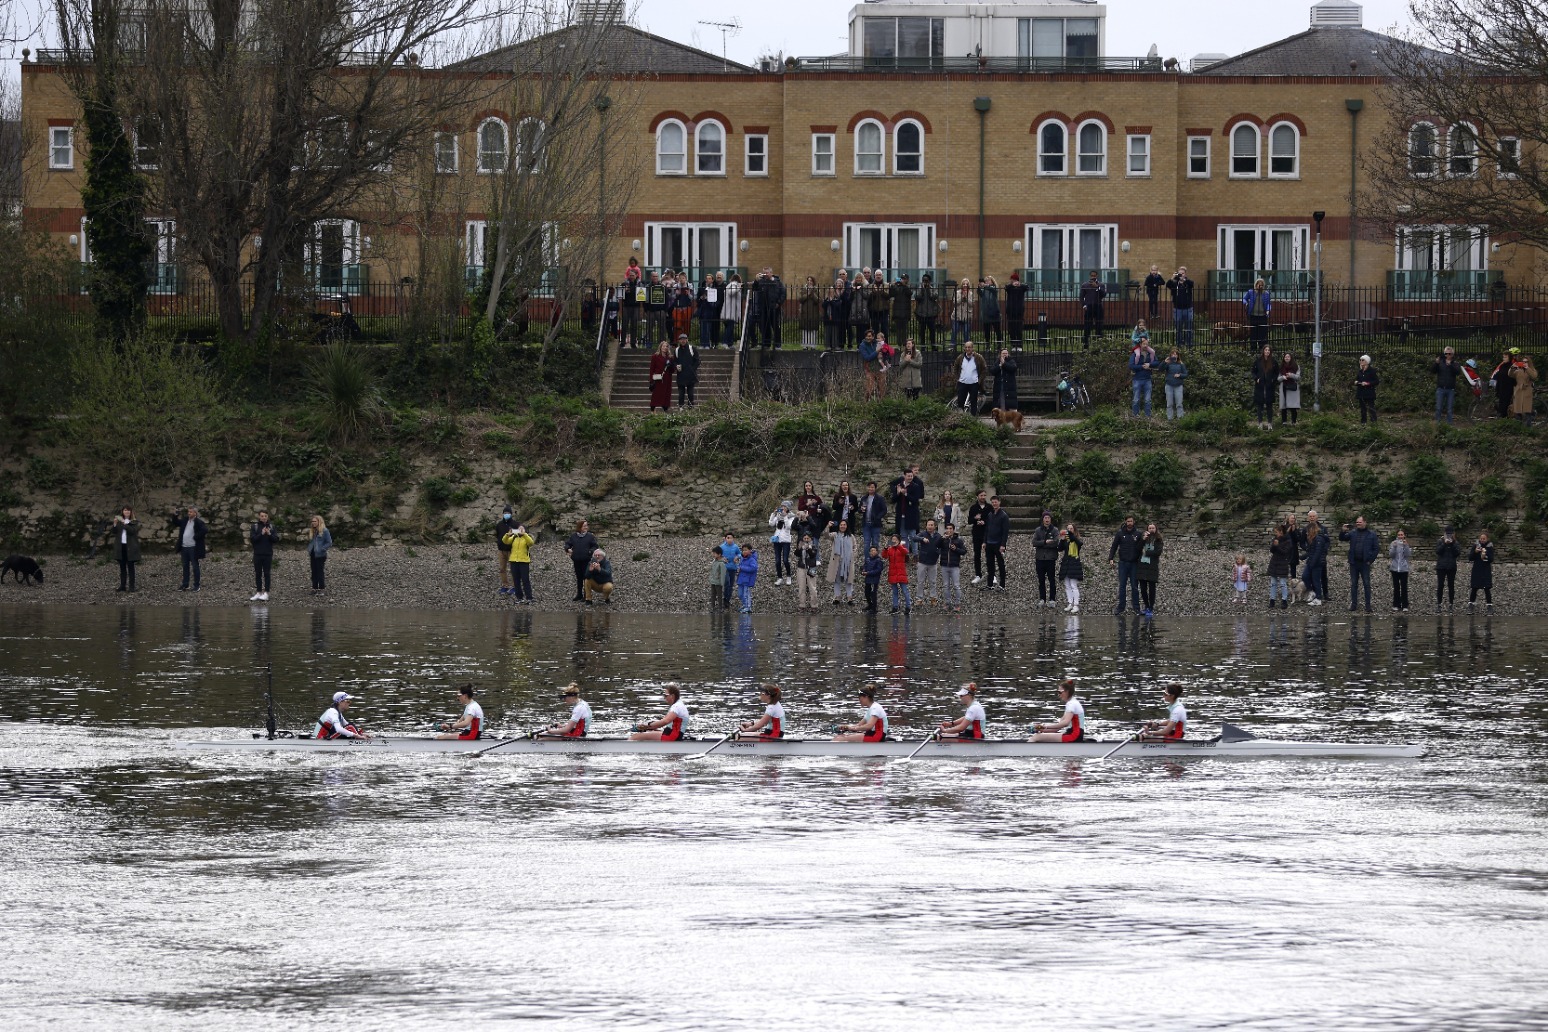 Cambridge have won the Womens Boat Race for the fifth time in a row